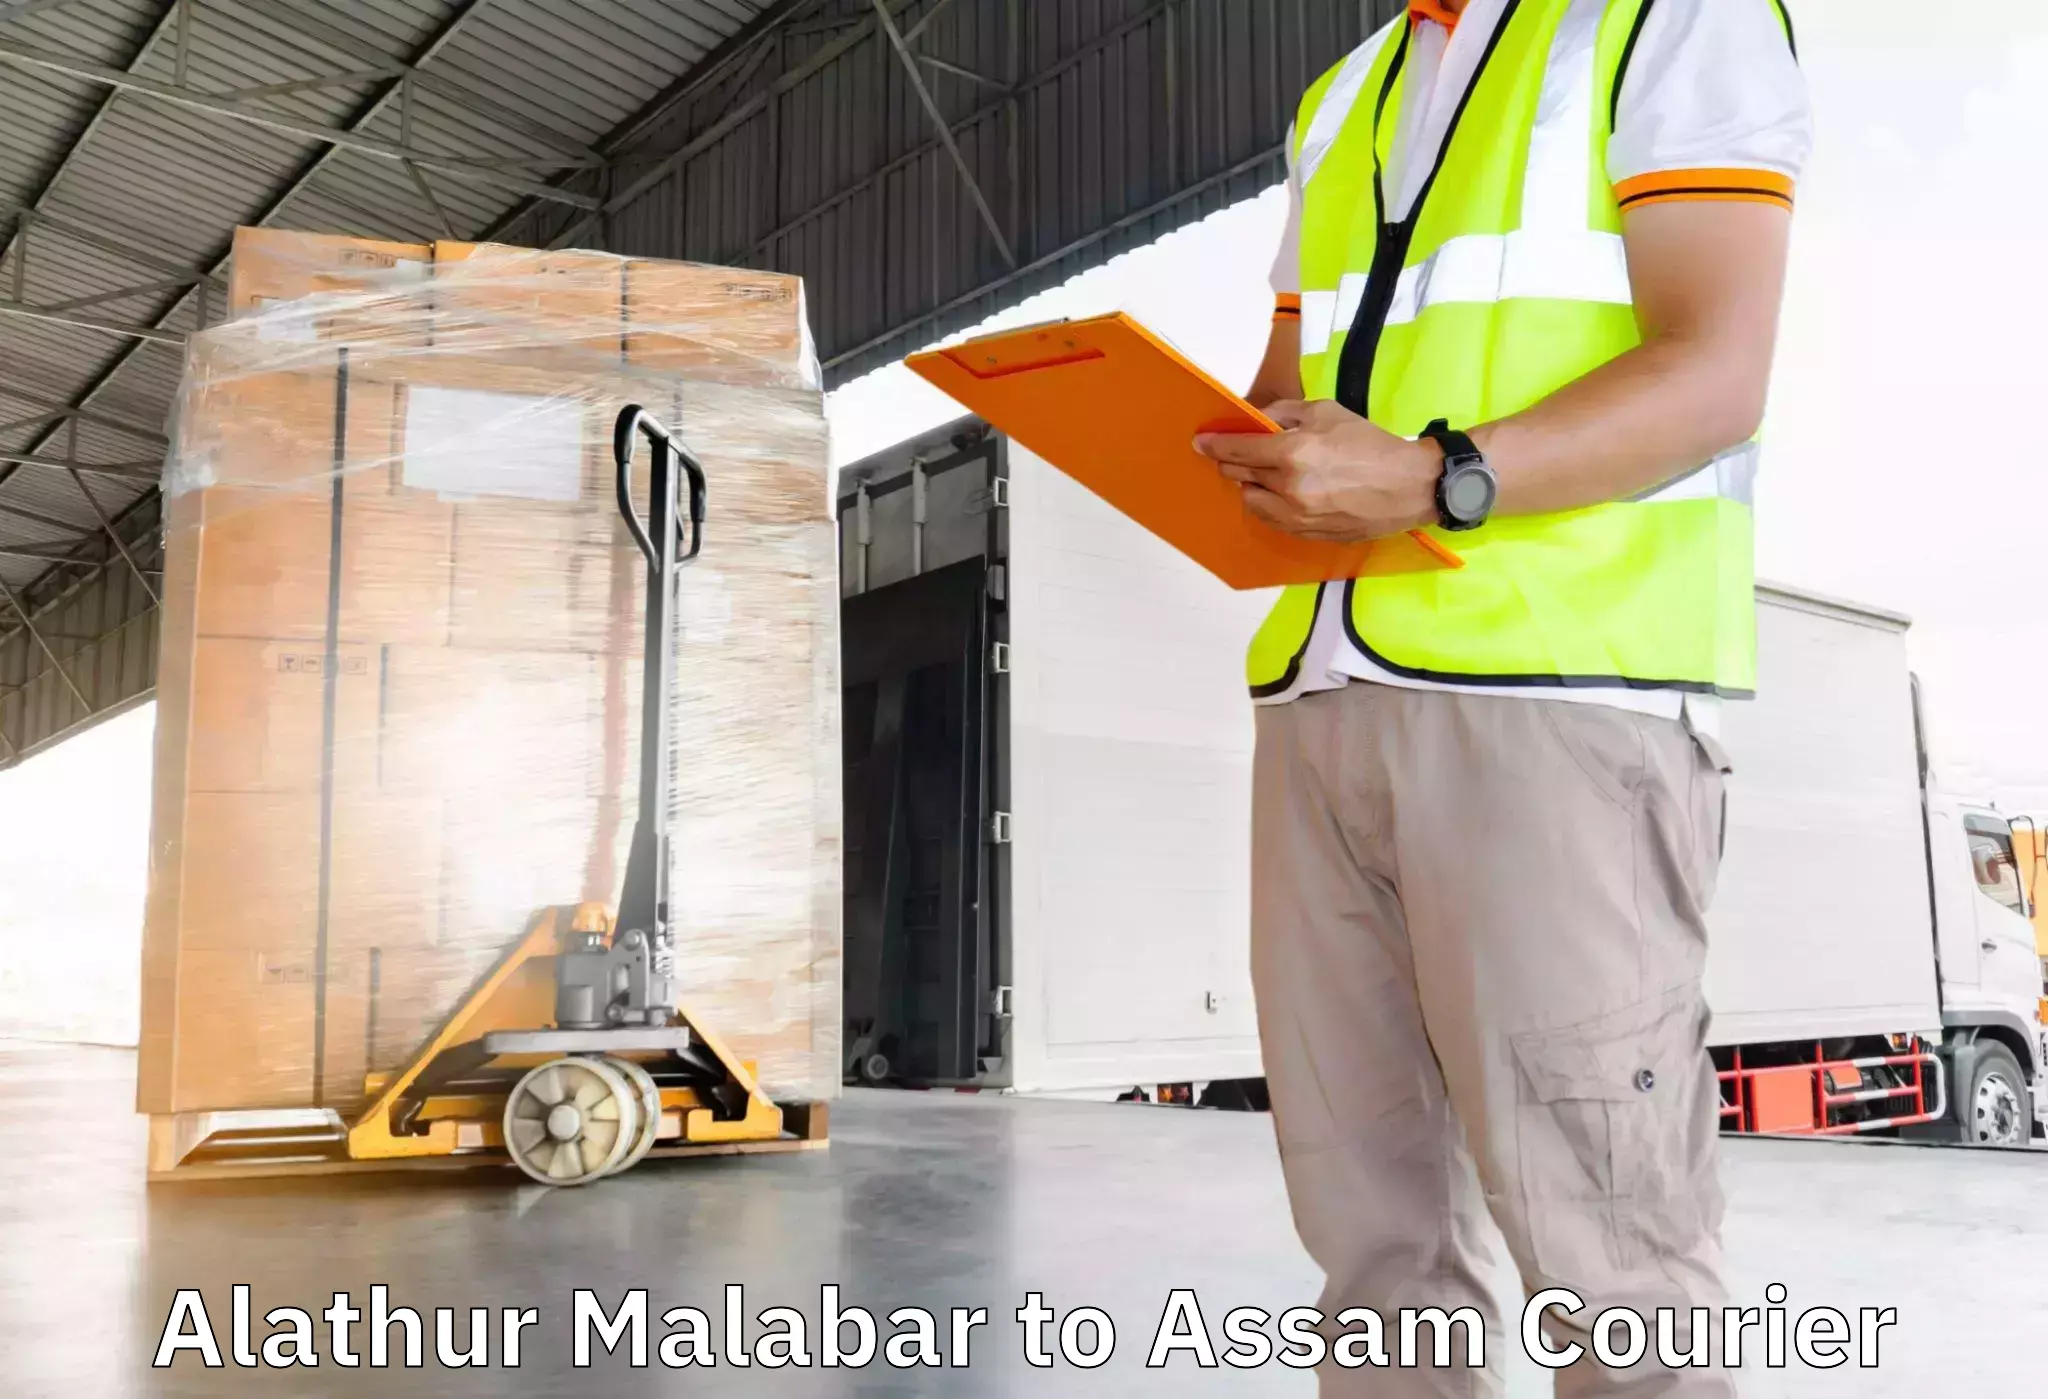 Affordable relocation services Alathur Malabar to Pathsala